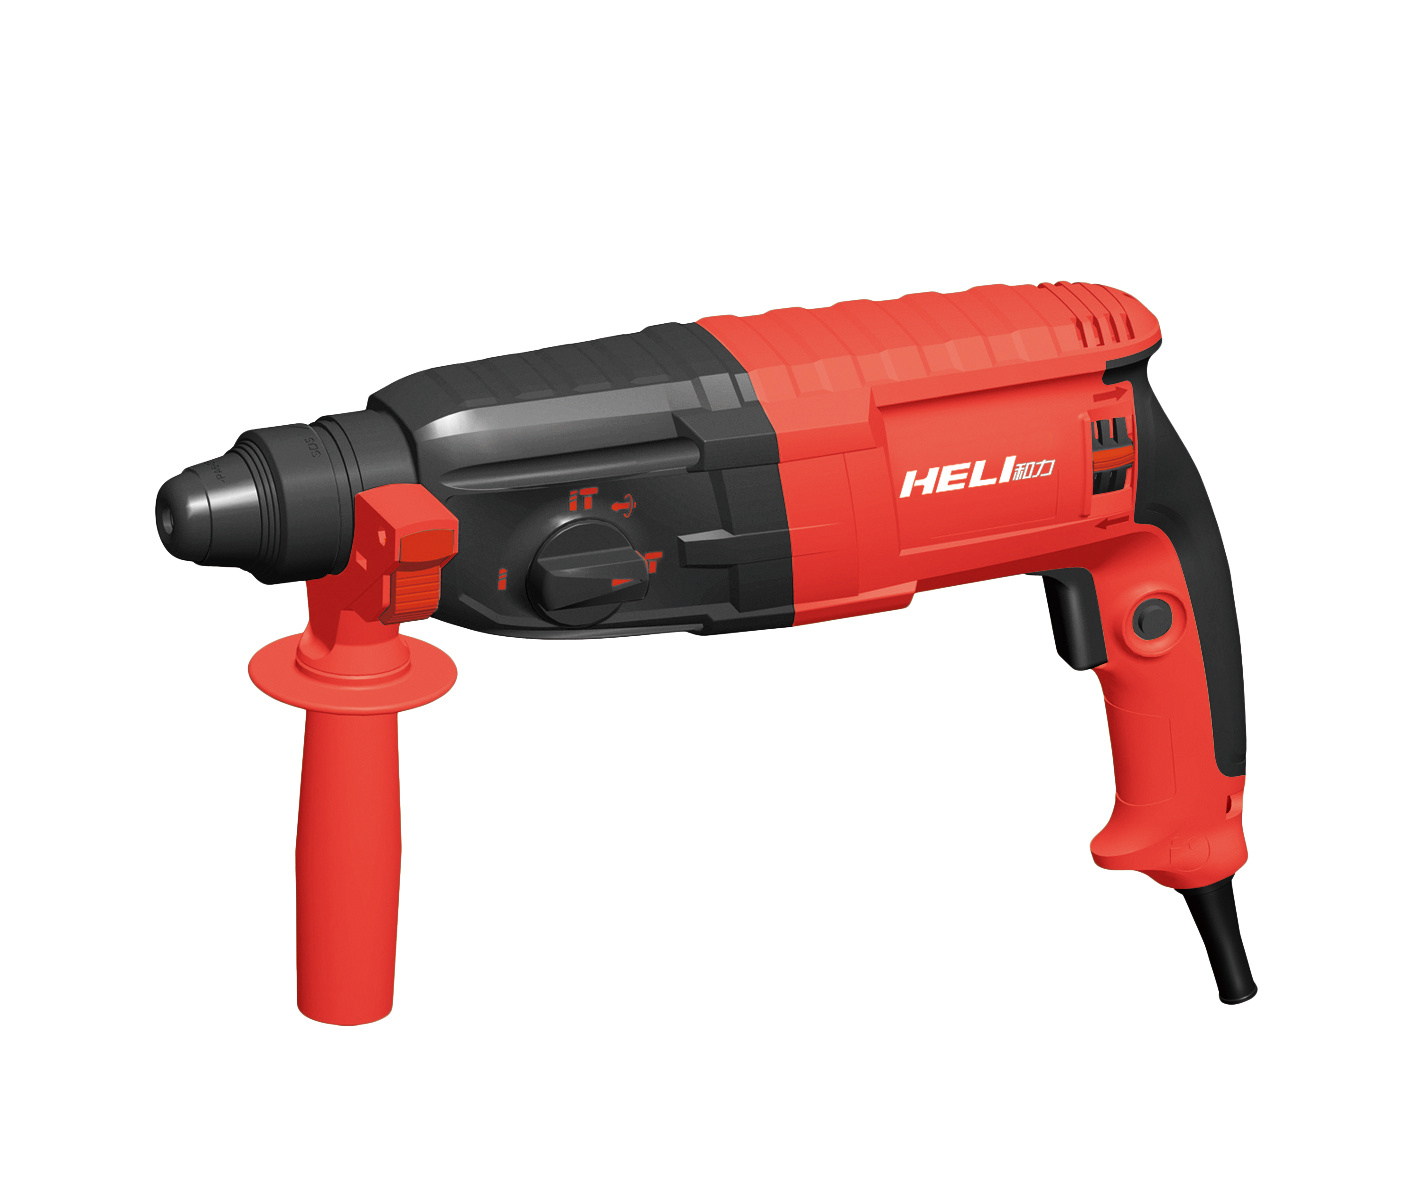 800W Classic Model Two Fuction Light Rotary Hammer